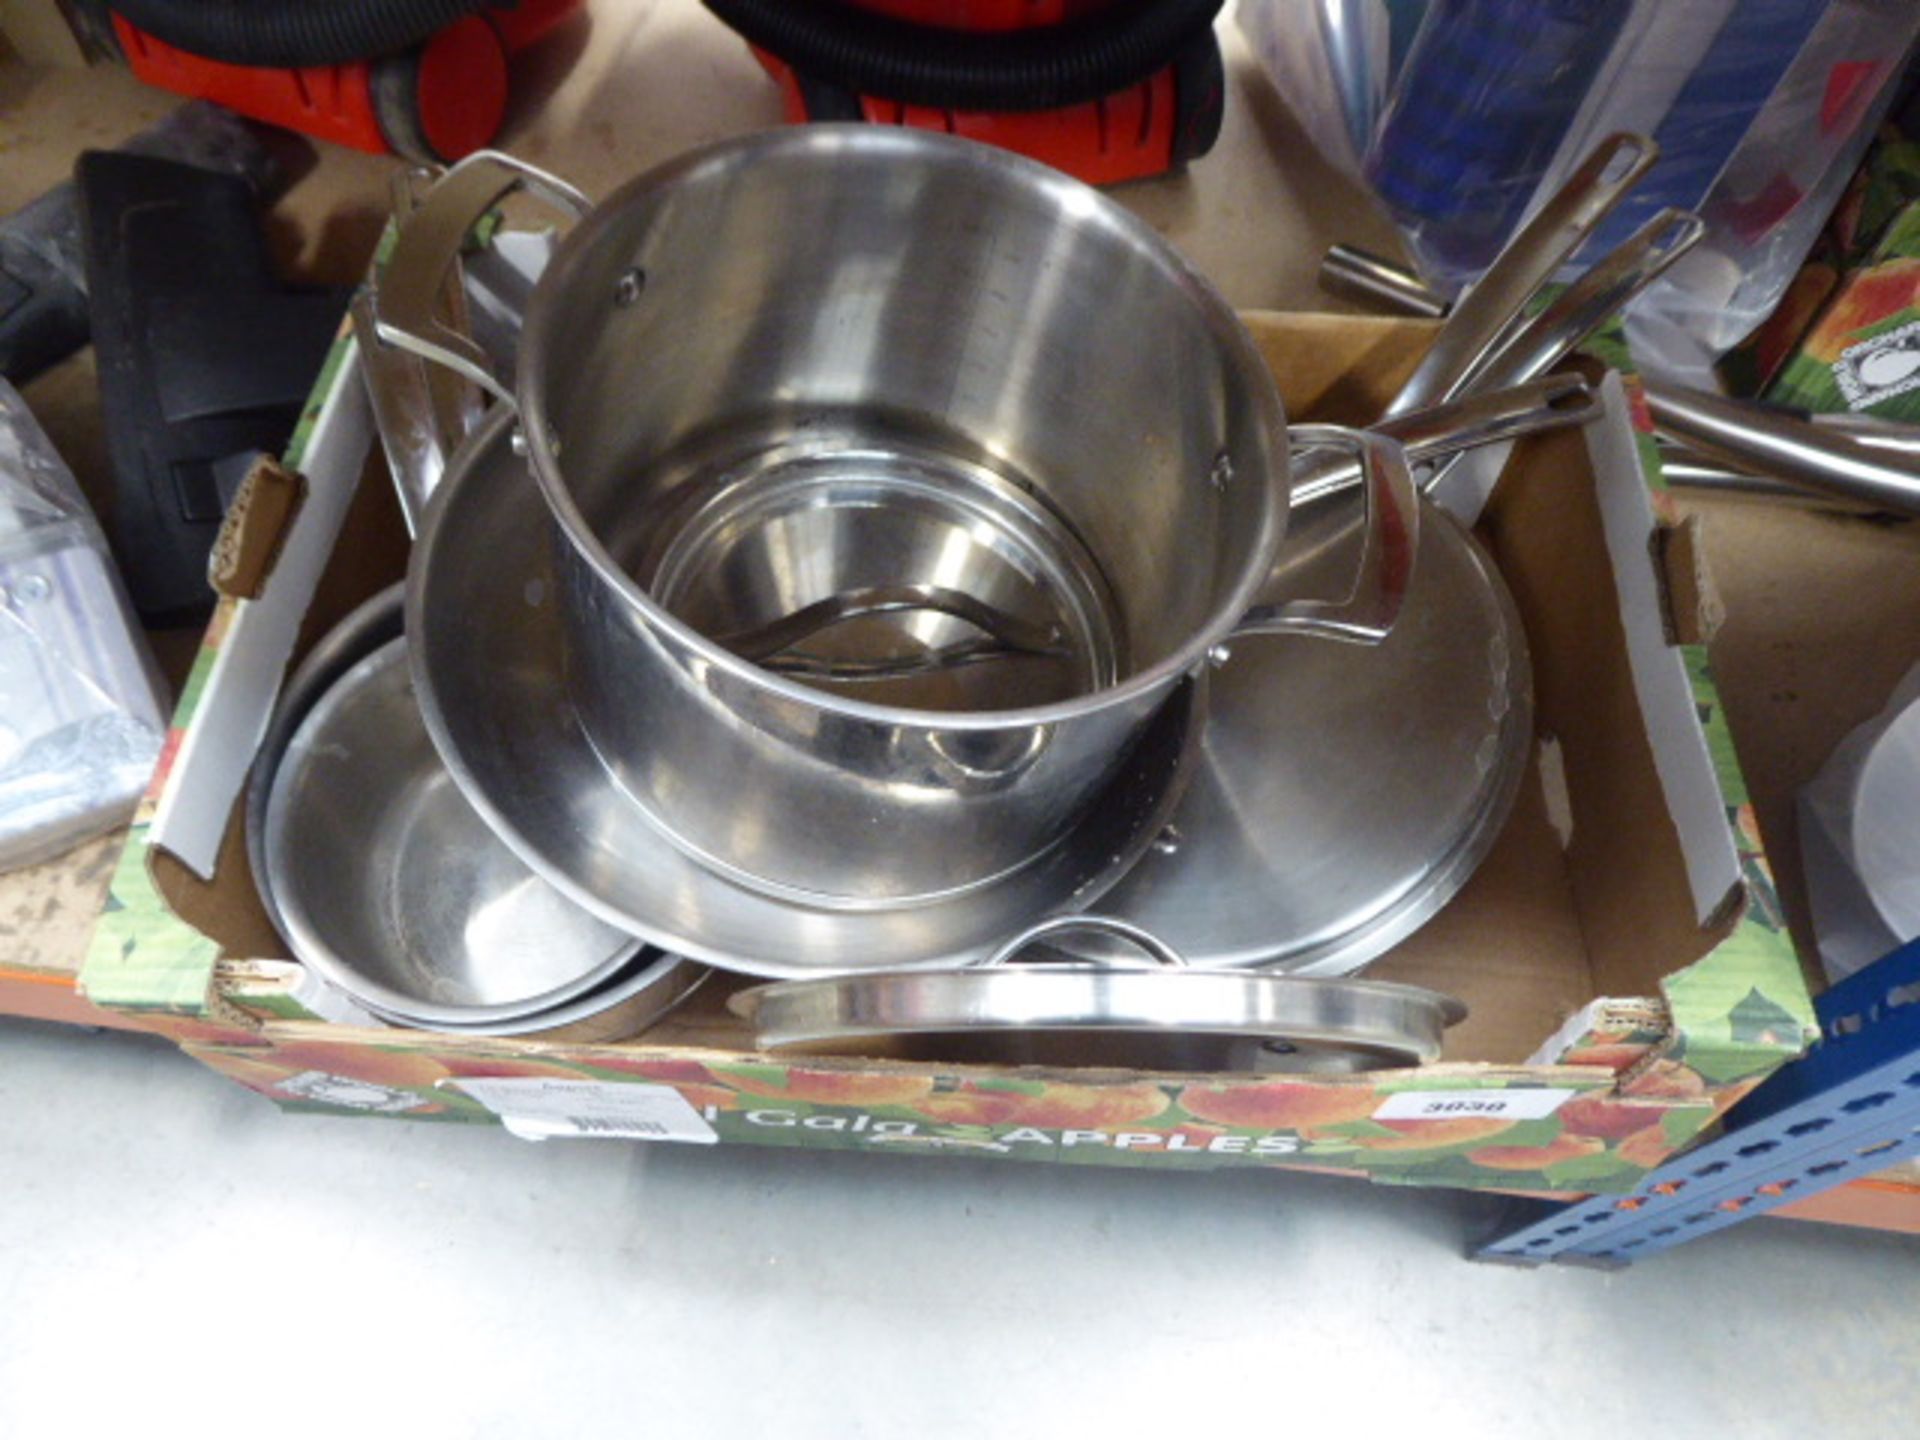 Tray containing stainless steel pots and pans, used